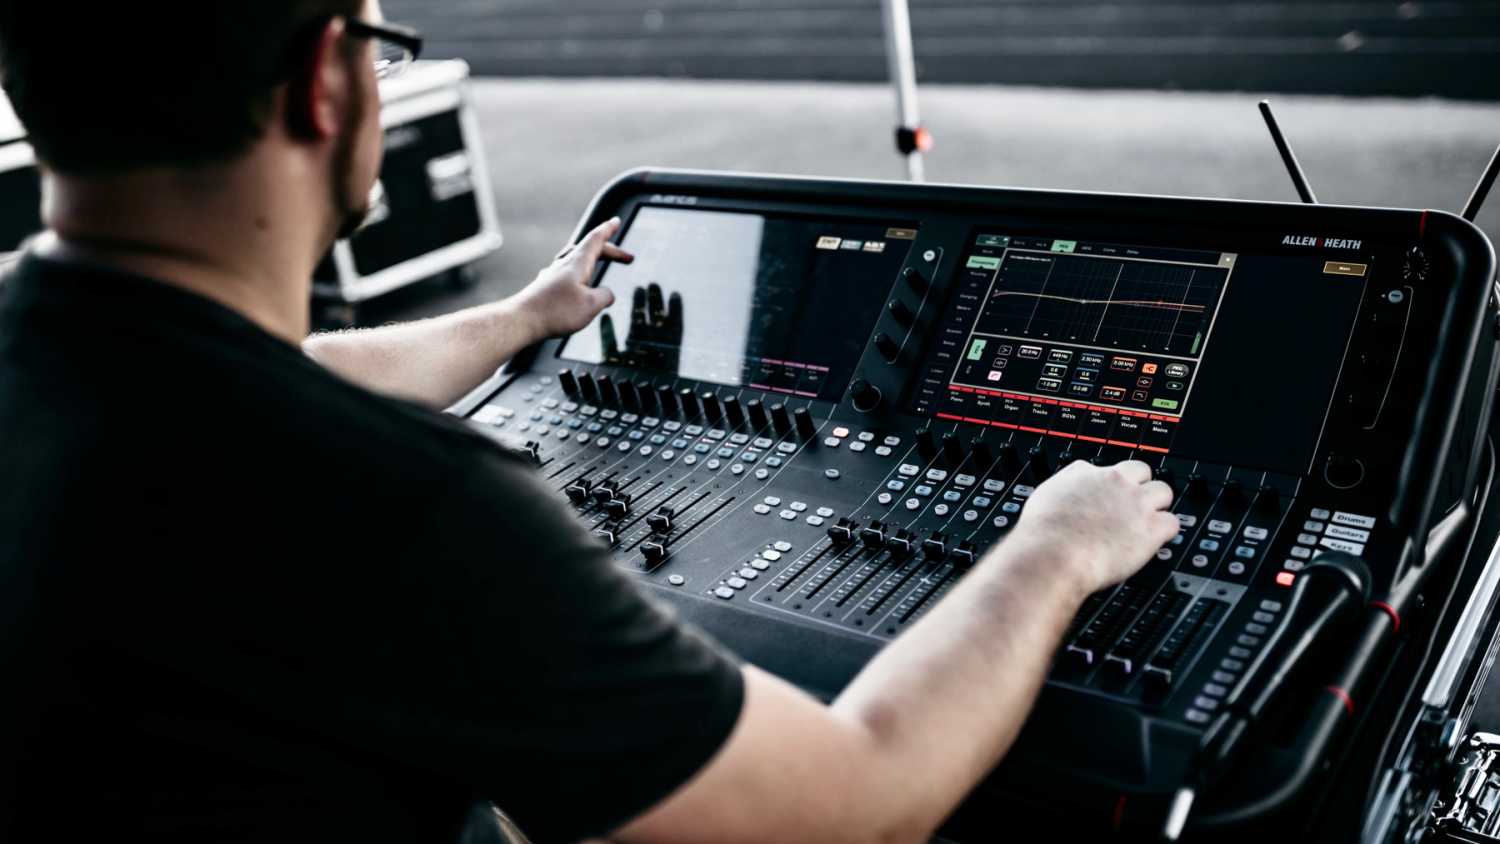 The band’s audio needs are handled by a 96kHz 64-channel Allen & Heath Avantis console